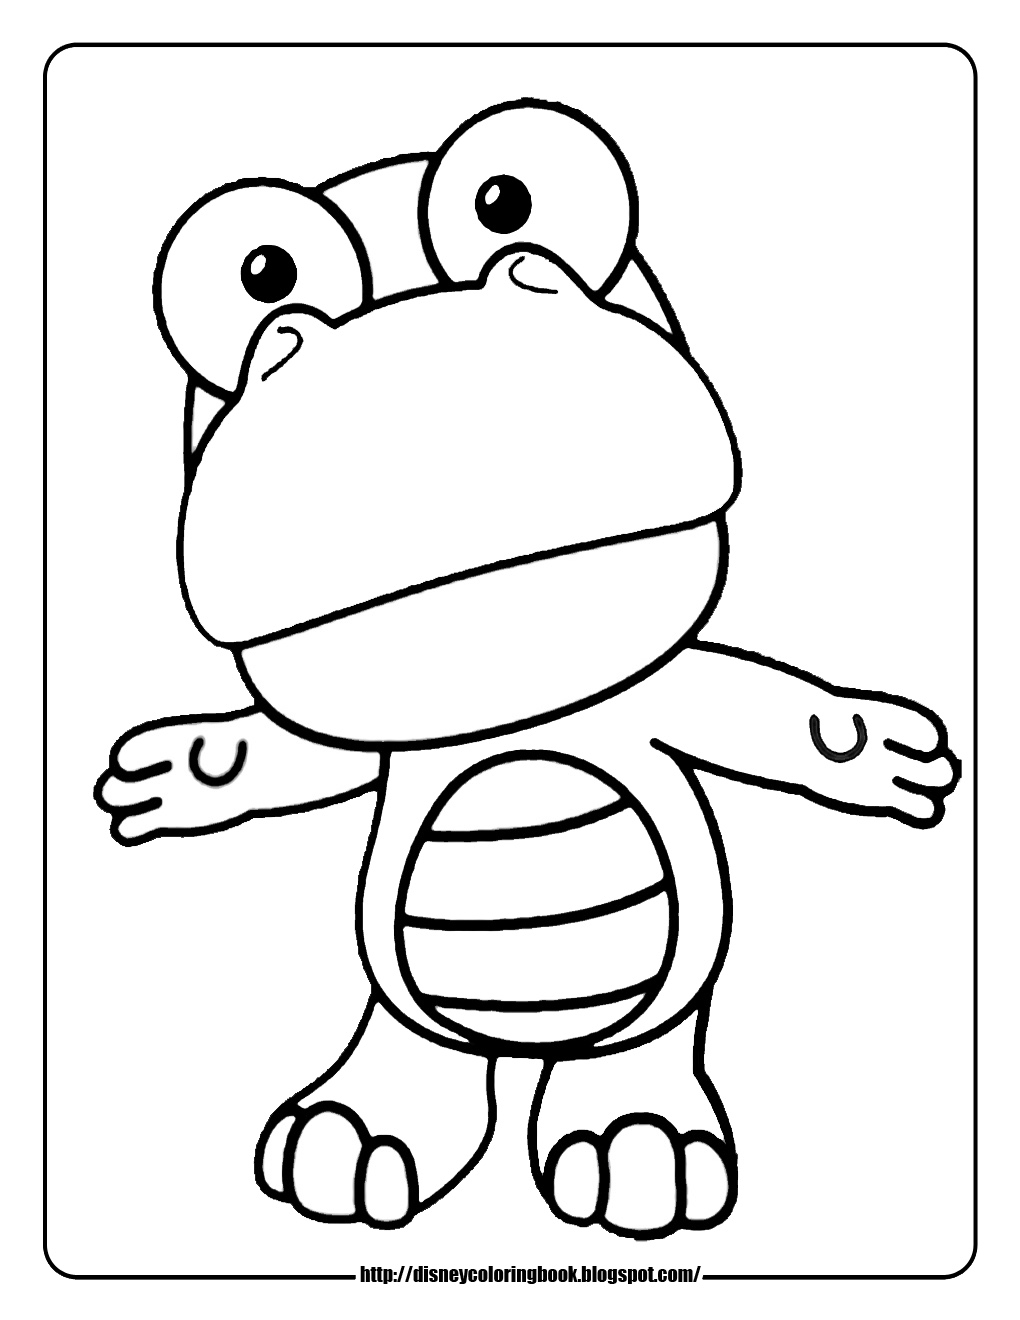 Baby Disney Cartoon Characters Coloring Pages – Pororo the Little ...